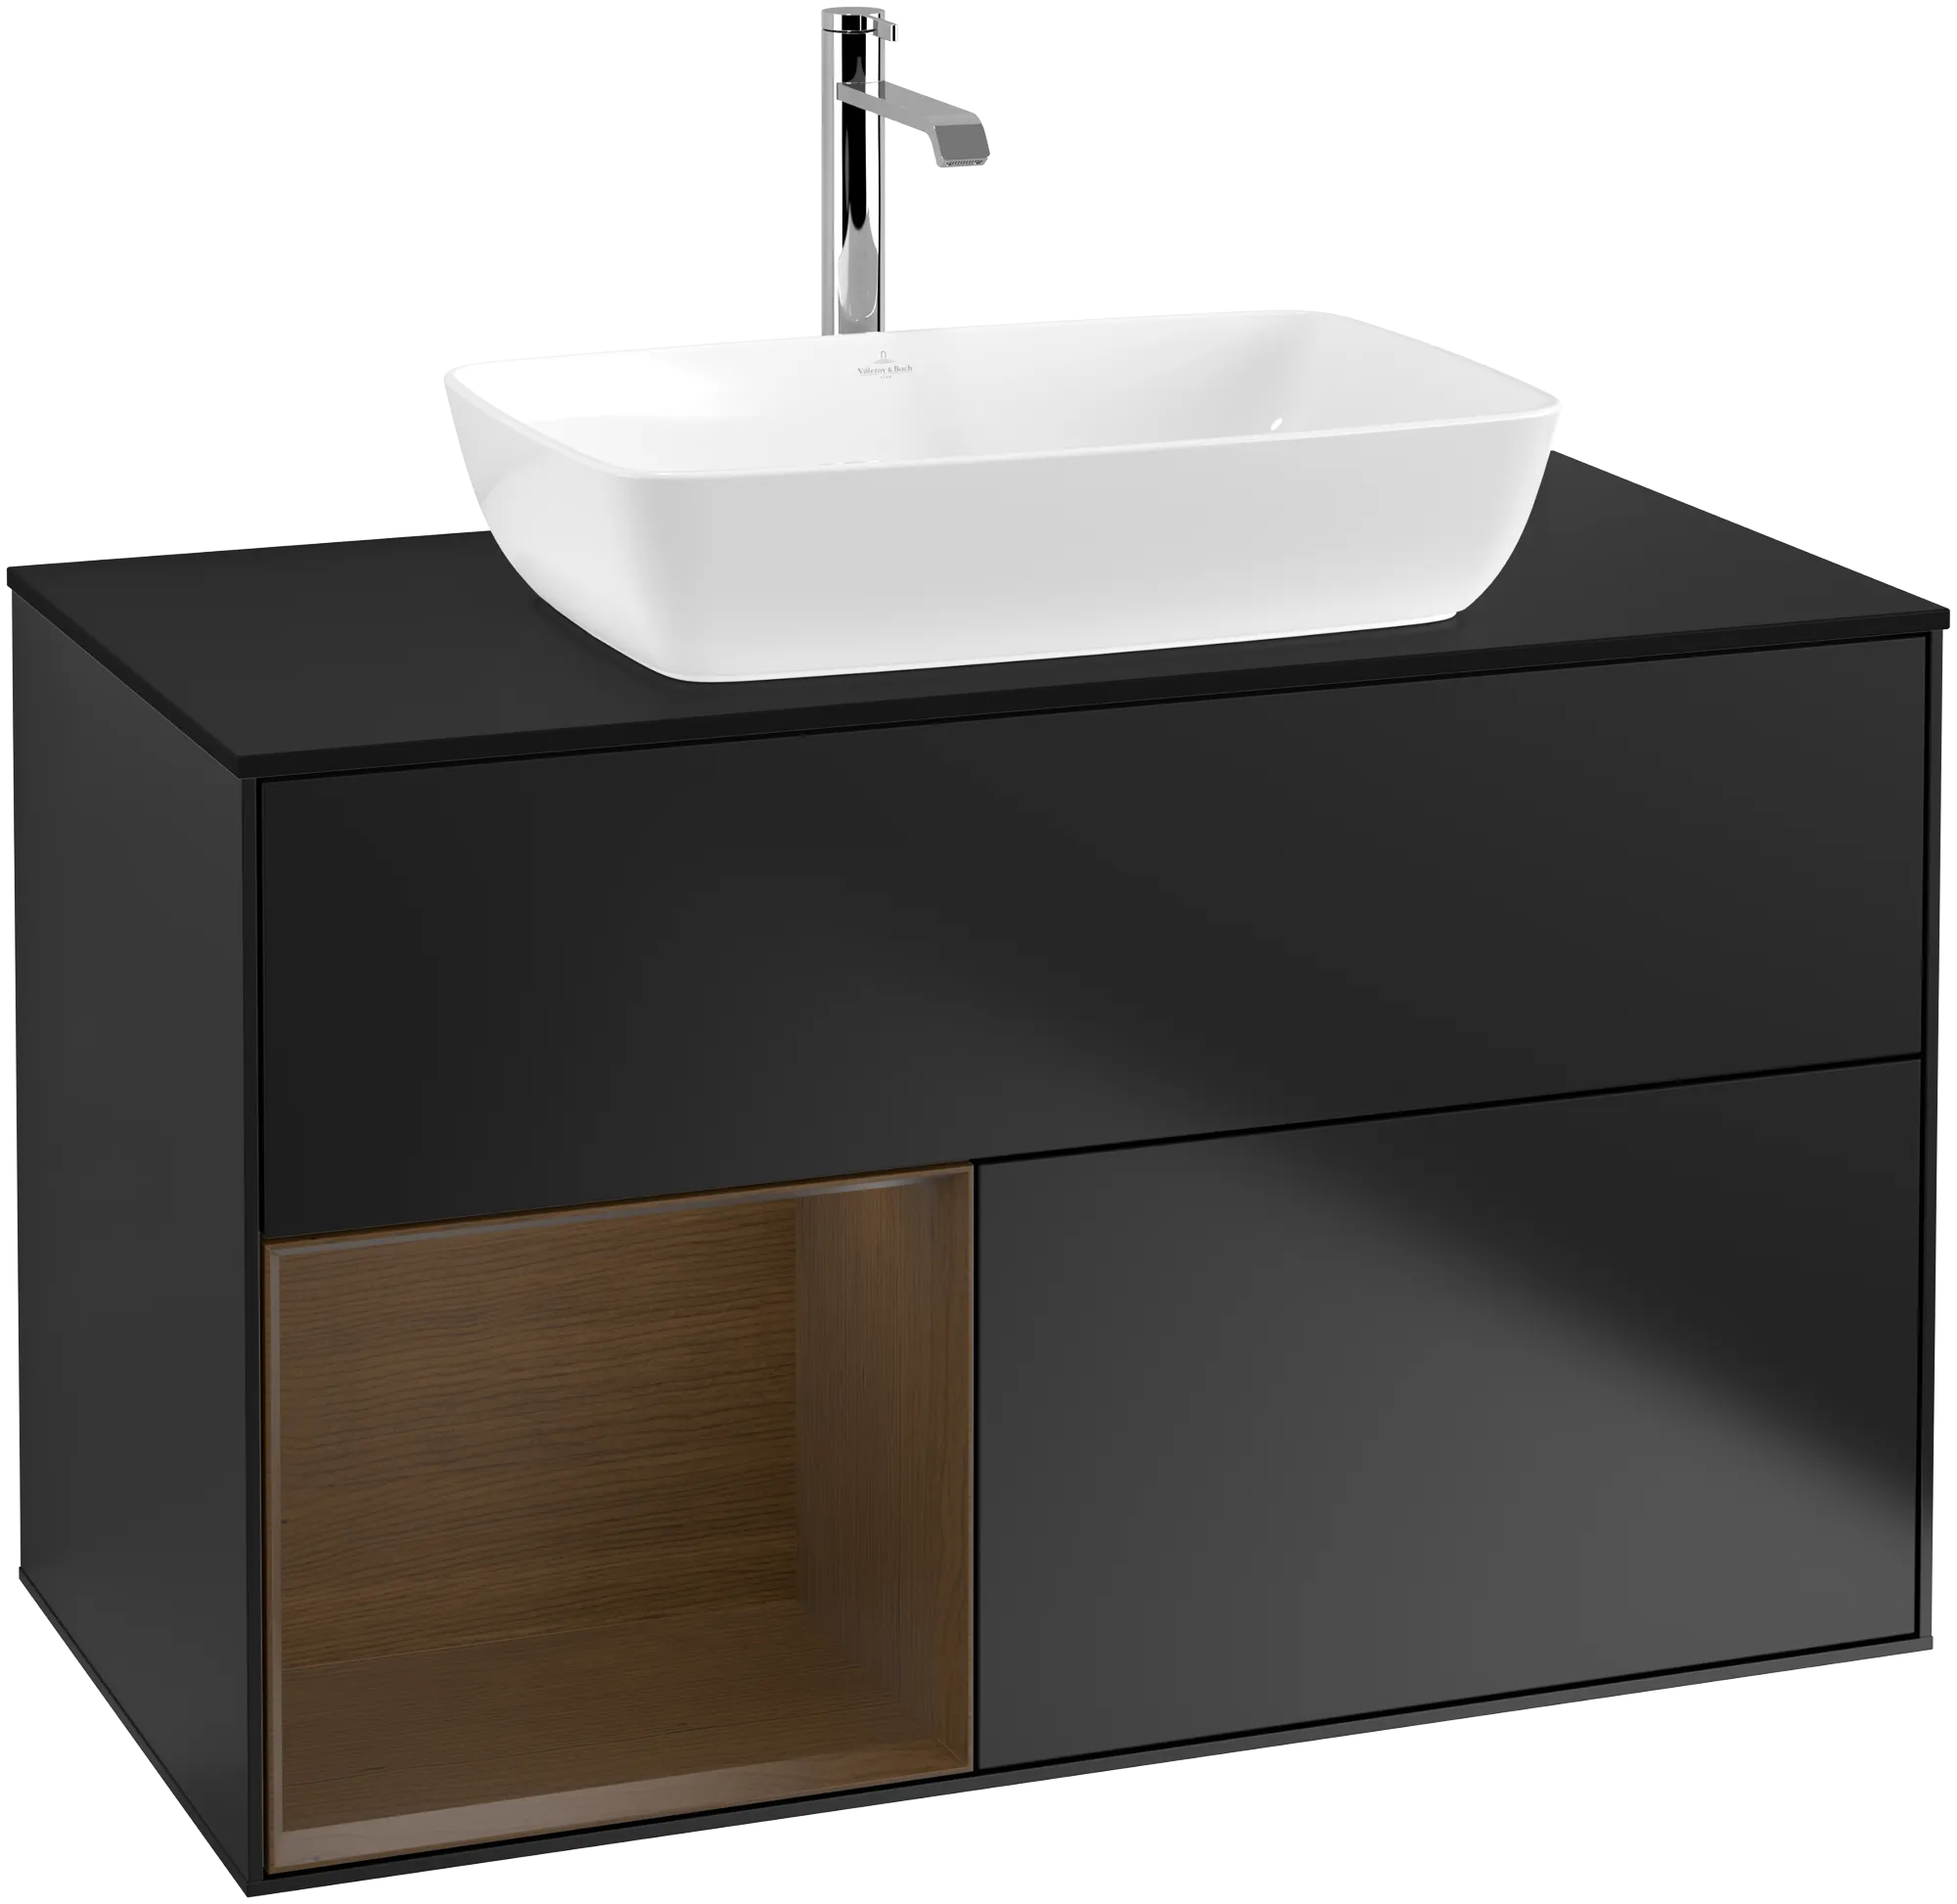 Picture of VILLEROY BOCH Finion Vanity unit, with lighting, 2 pull-out compartments, 1000 x 603 x 501 mm, Black Matt Lacquer / Walnut Veneer / Glass Black Matt #G772GNPD